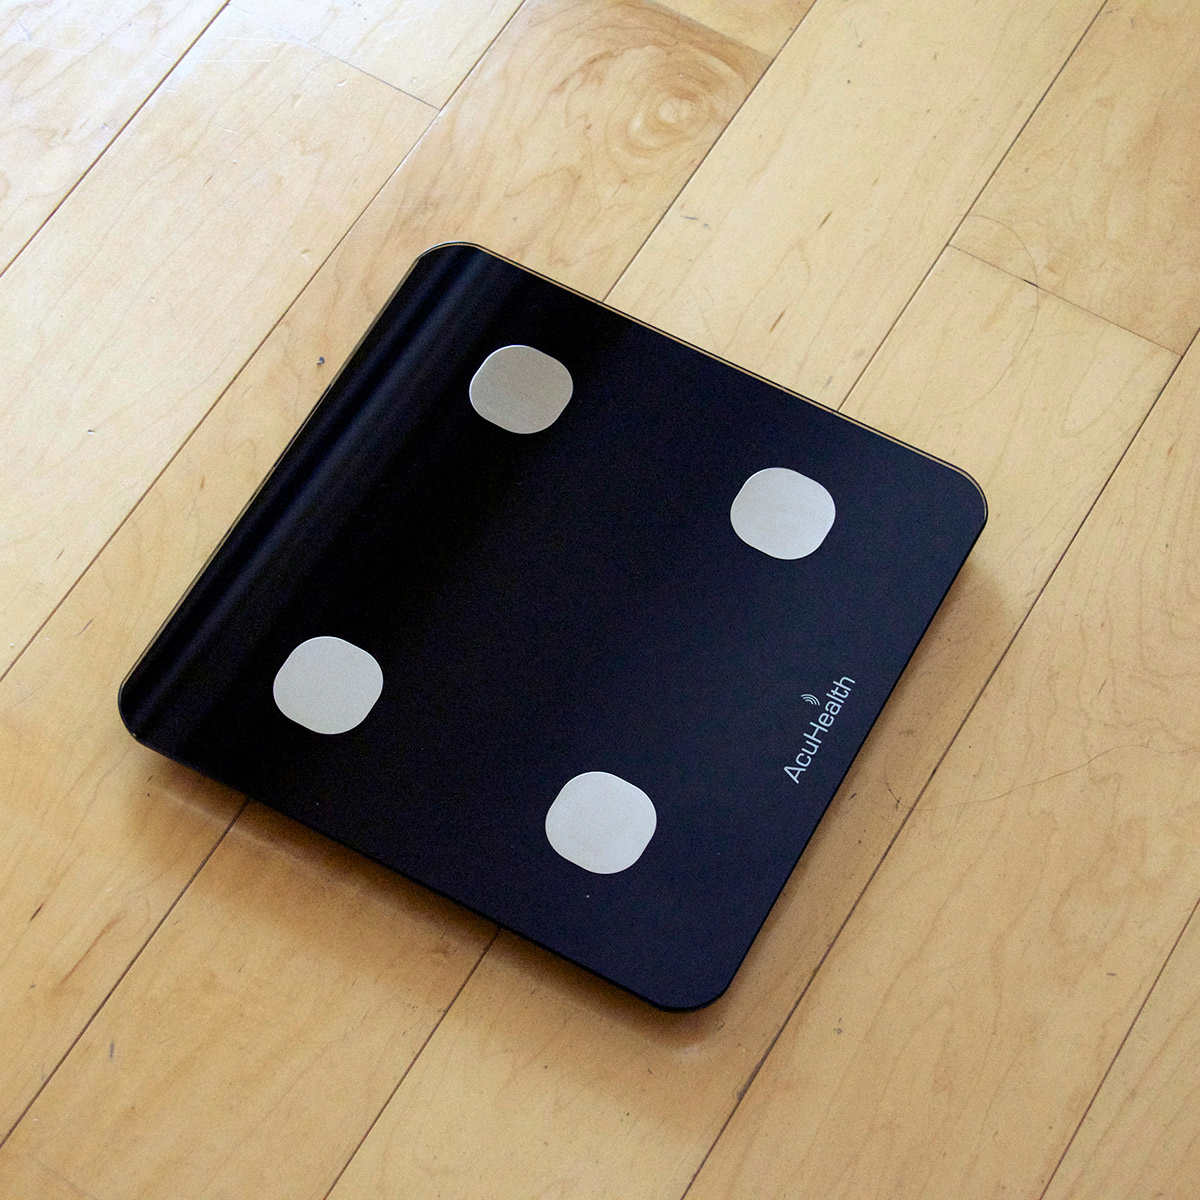 AcuHealth Body Fat Scale and Fitness Analyzer